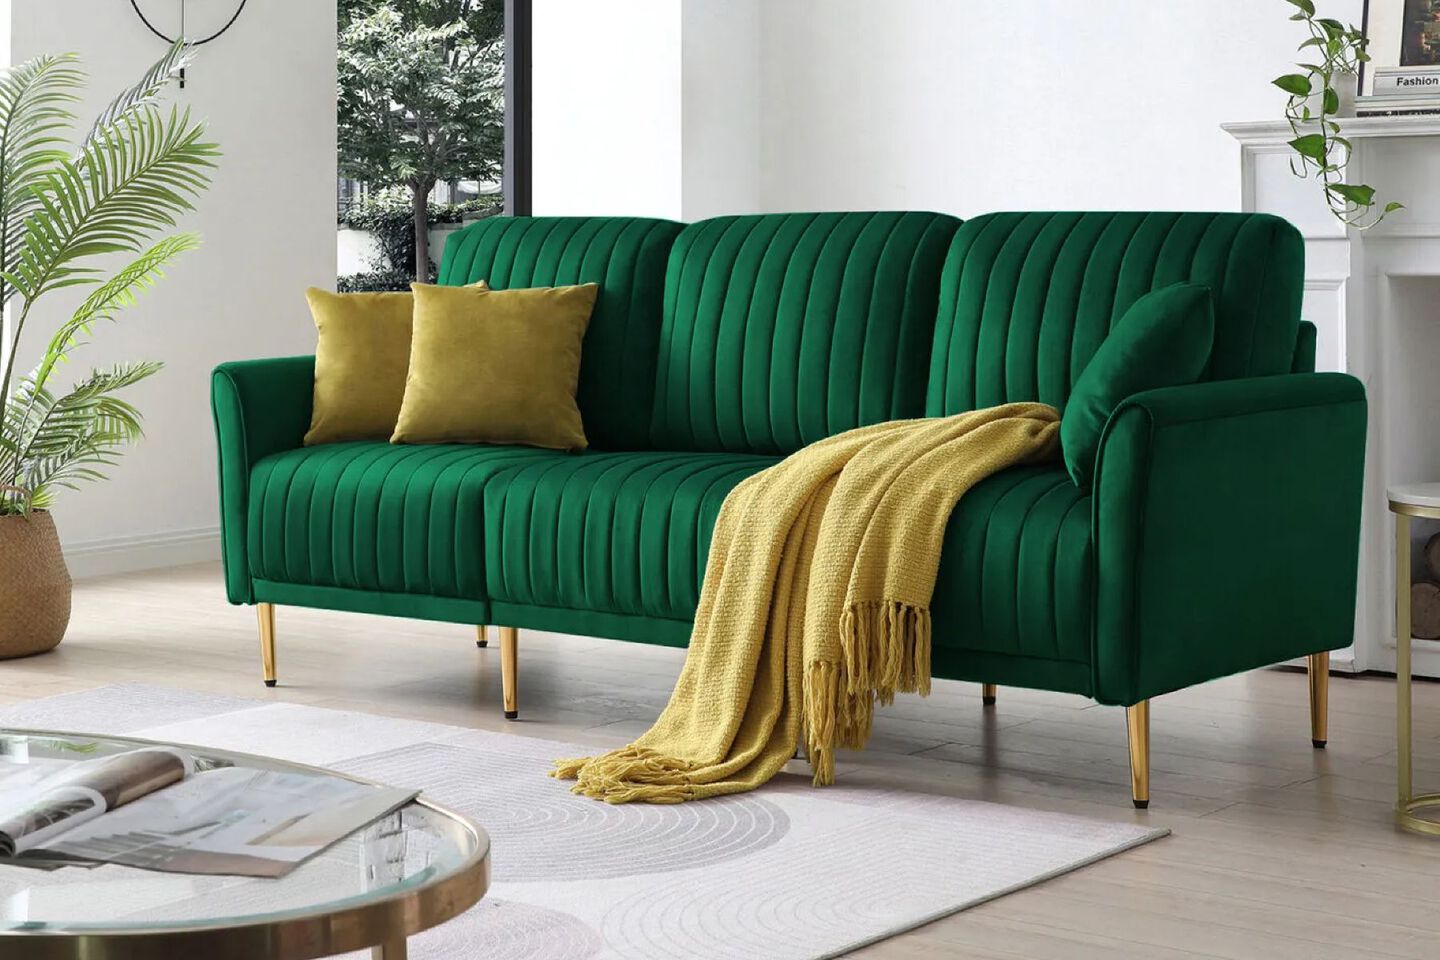 Emerald green couch with yellow pillows and blanket draped over it